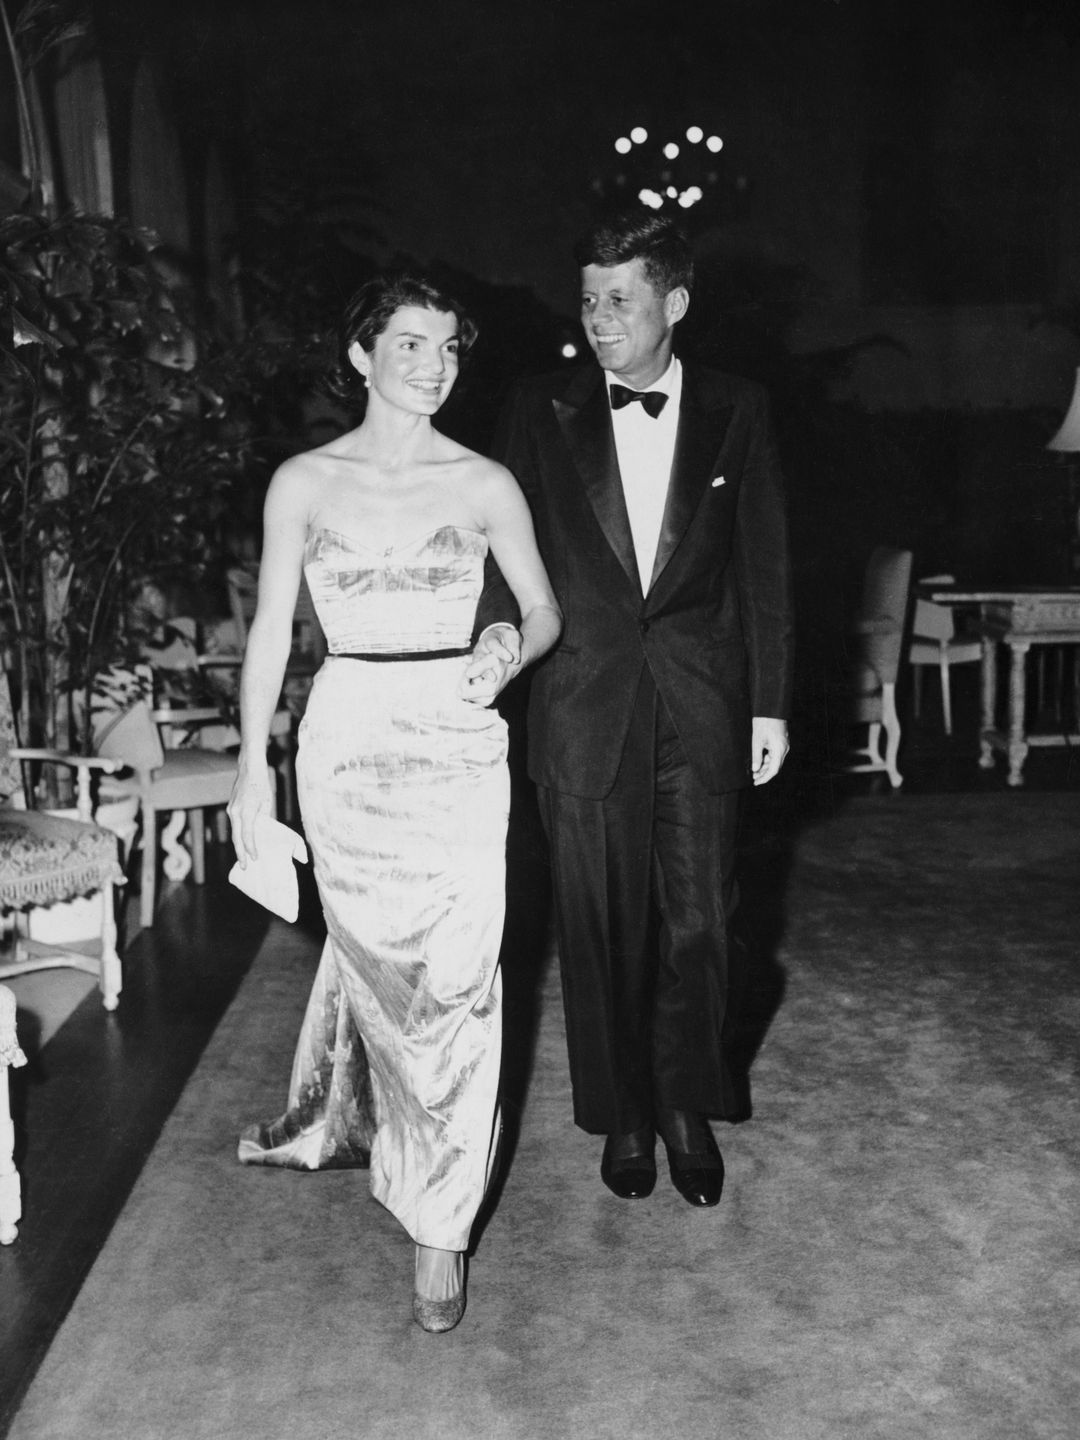 Senator John F. Kennedy walking with wife, Jackie, at the Senate Office Building.